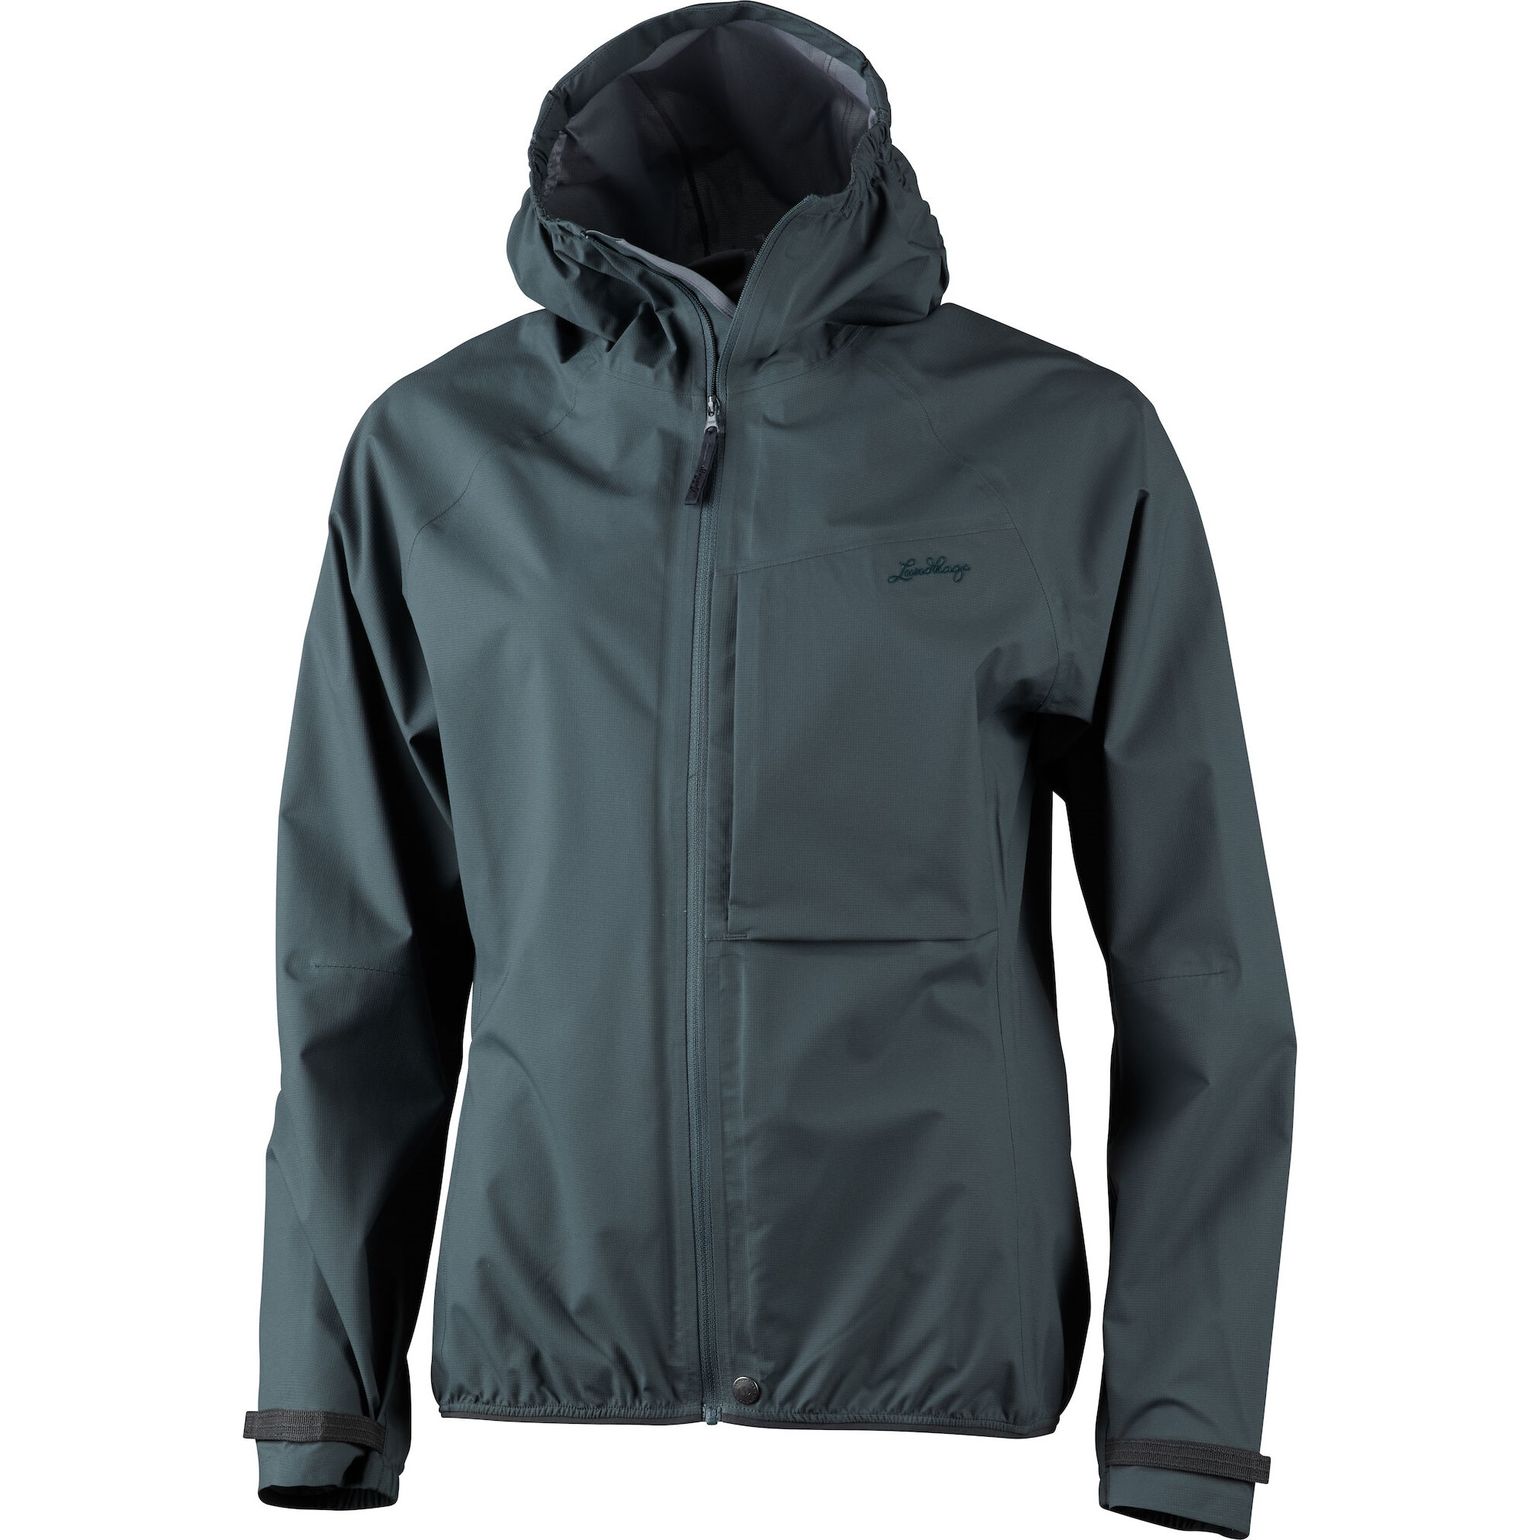 Lundhags Women's Lo Jacket Dk Agave